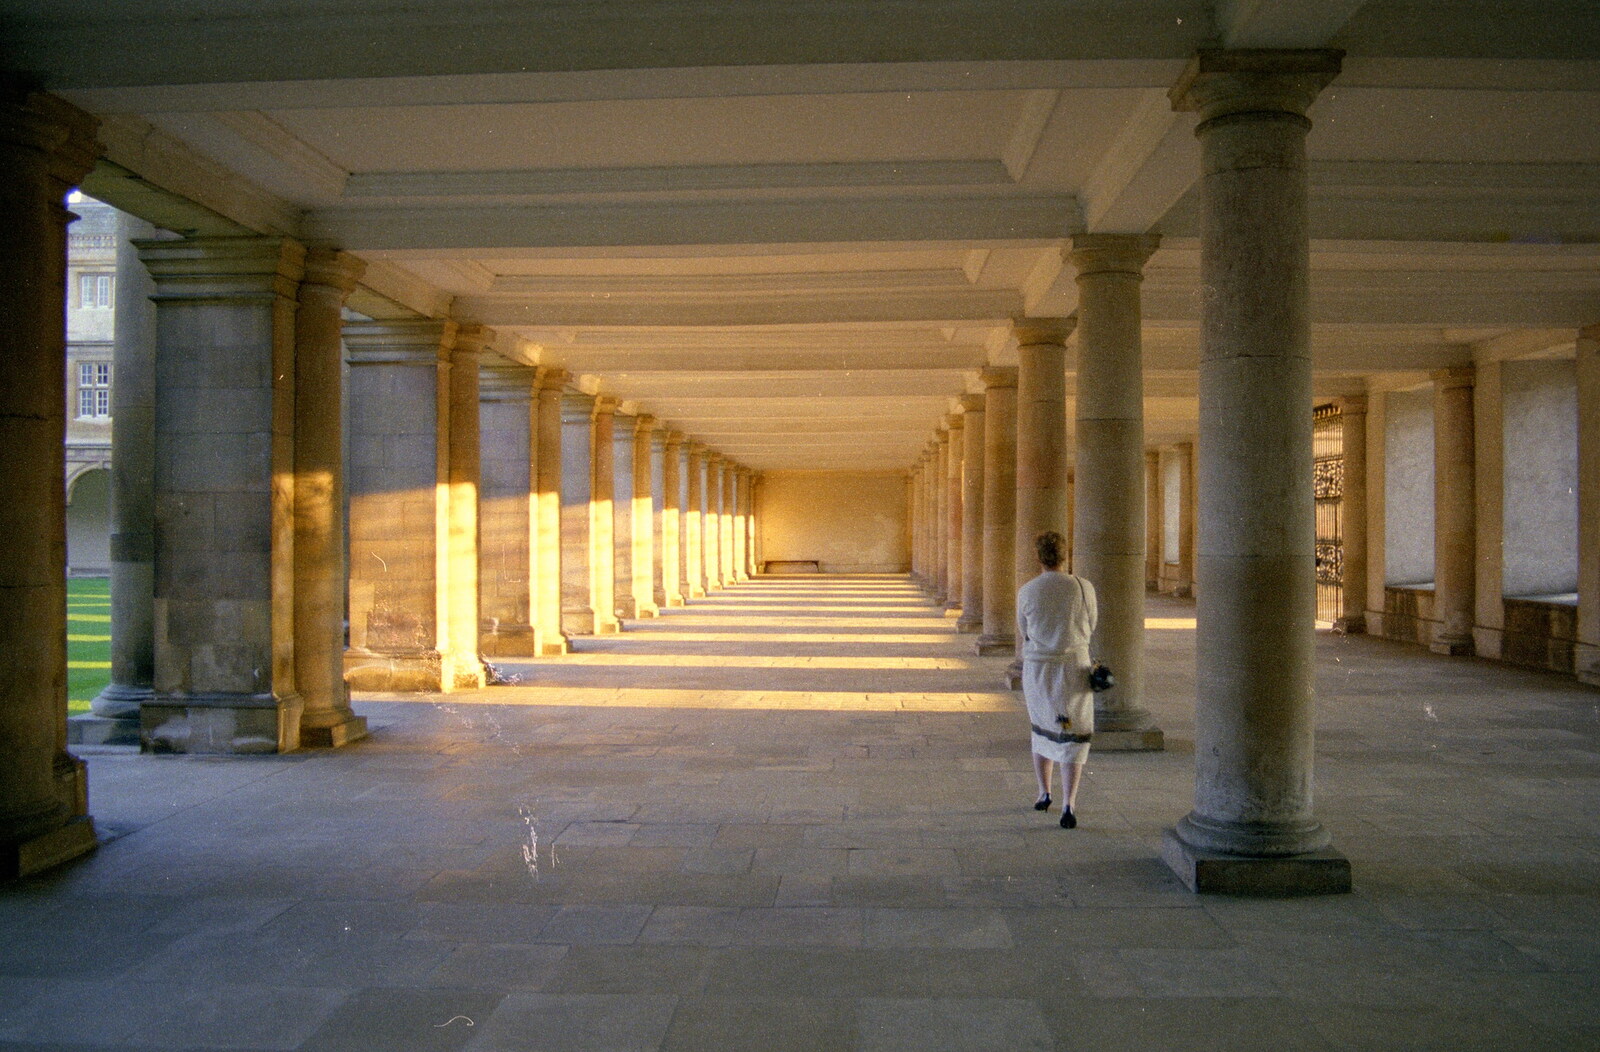 Anna roams the columned cloisters from A Trip to Trinity College, Cambridge - 23rd March 1986